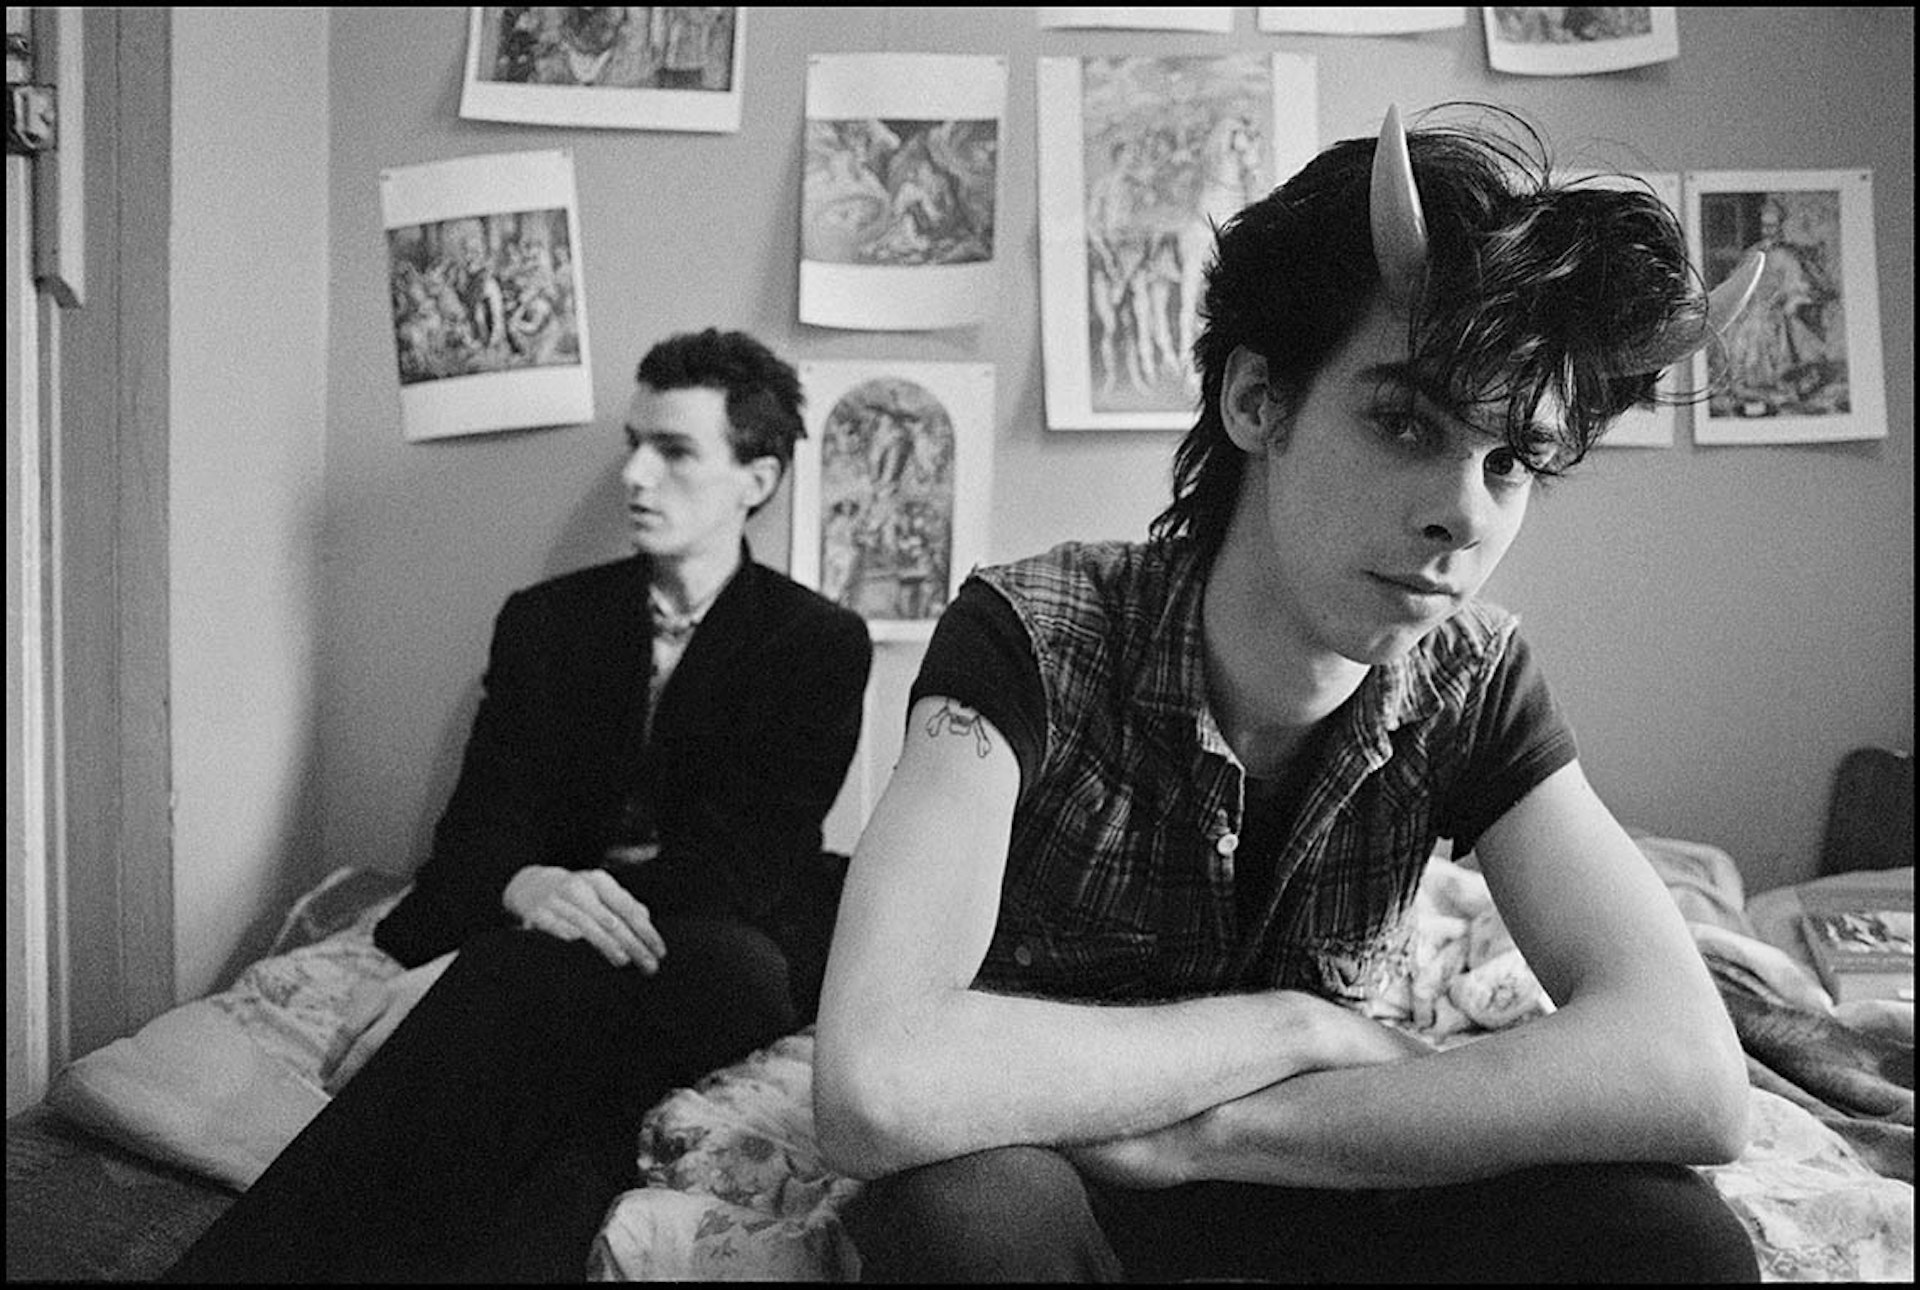 The chaotic years of Nick Cave's band the Birthday Party